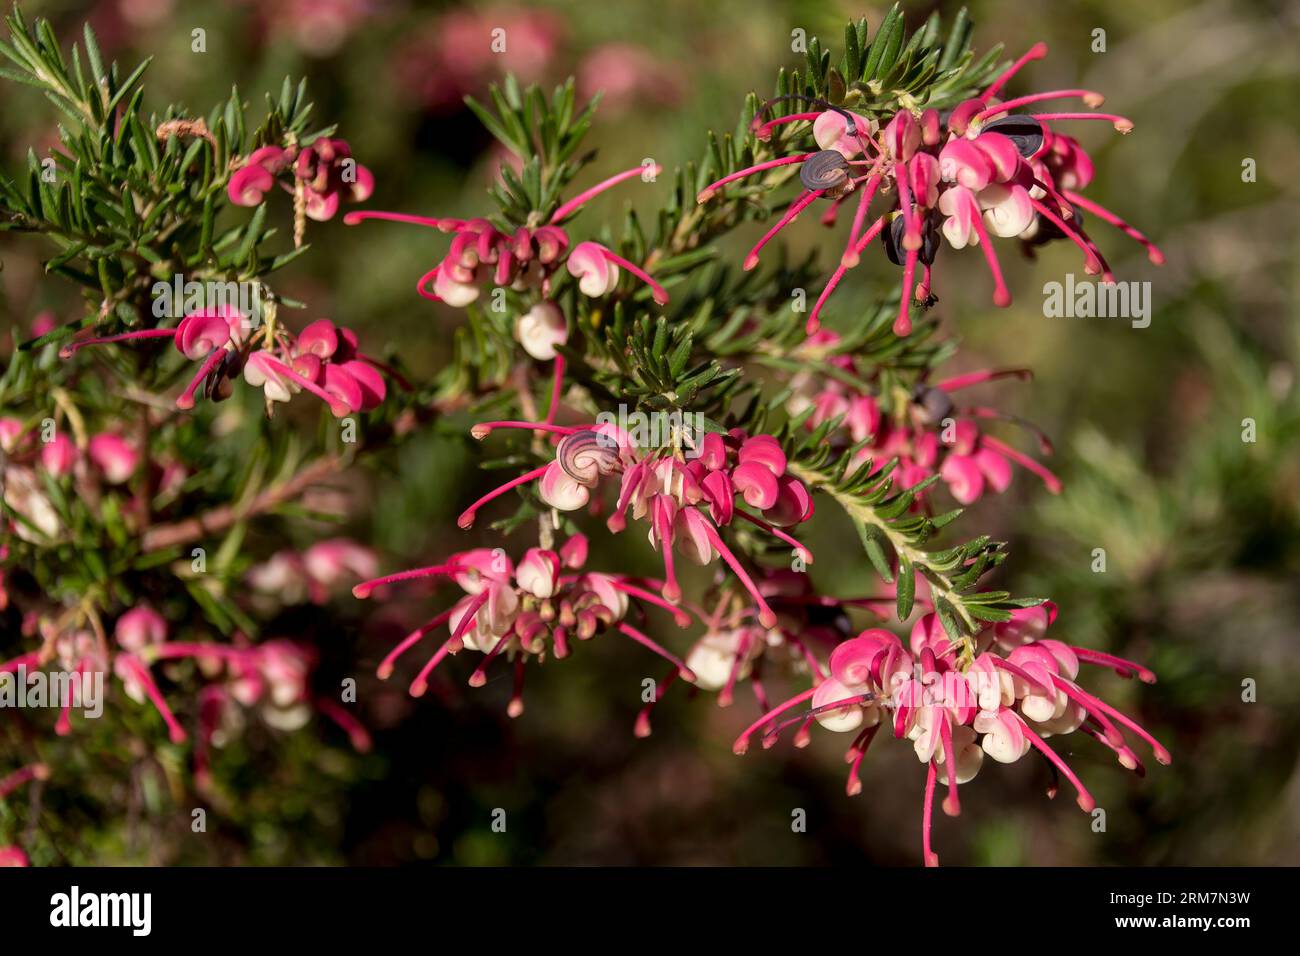 Australian native shrub Grevillea Poorinda Rondeau, full bloom, clusters of delicate rose-red and white flowers. Sunny garden, winter, Queensland. Stock Photo